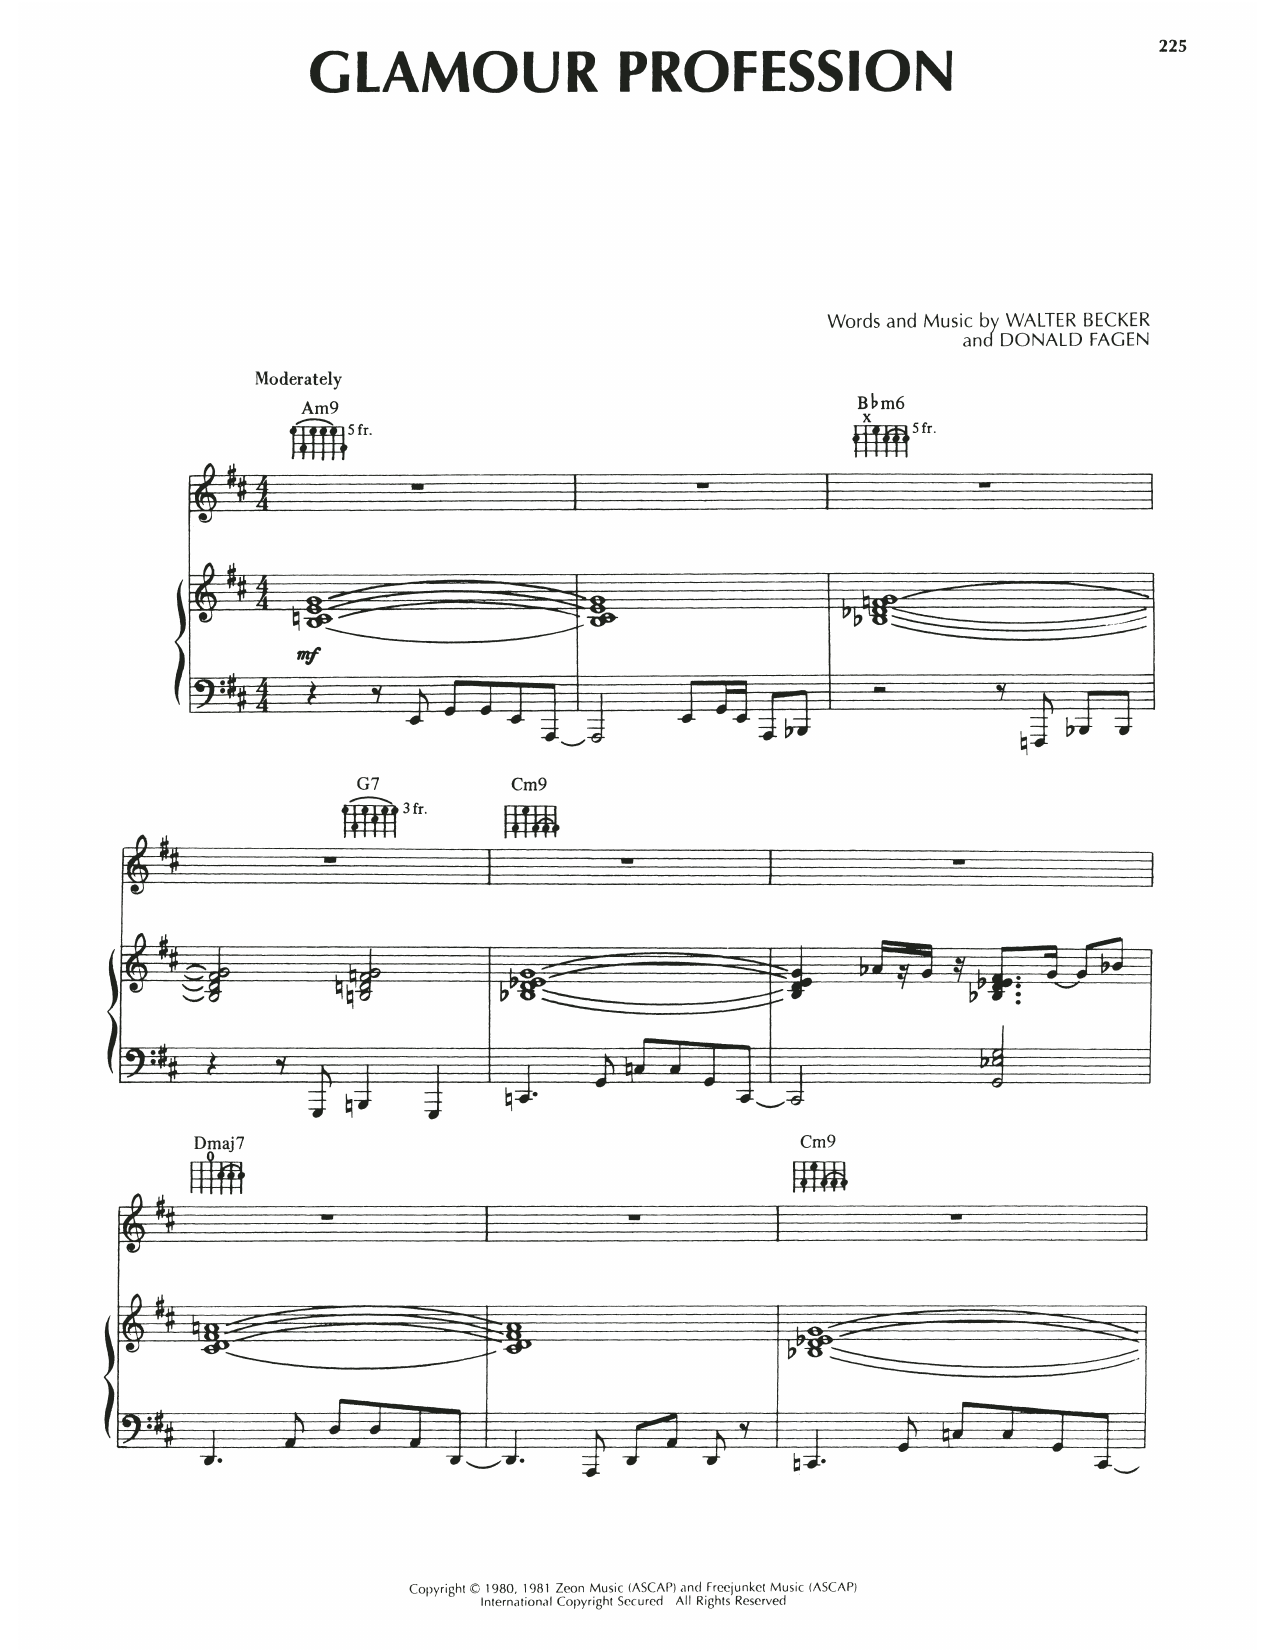 Download Steely Dan Glamour Profession Sheet Music